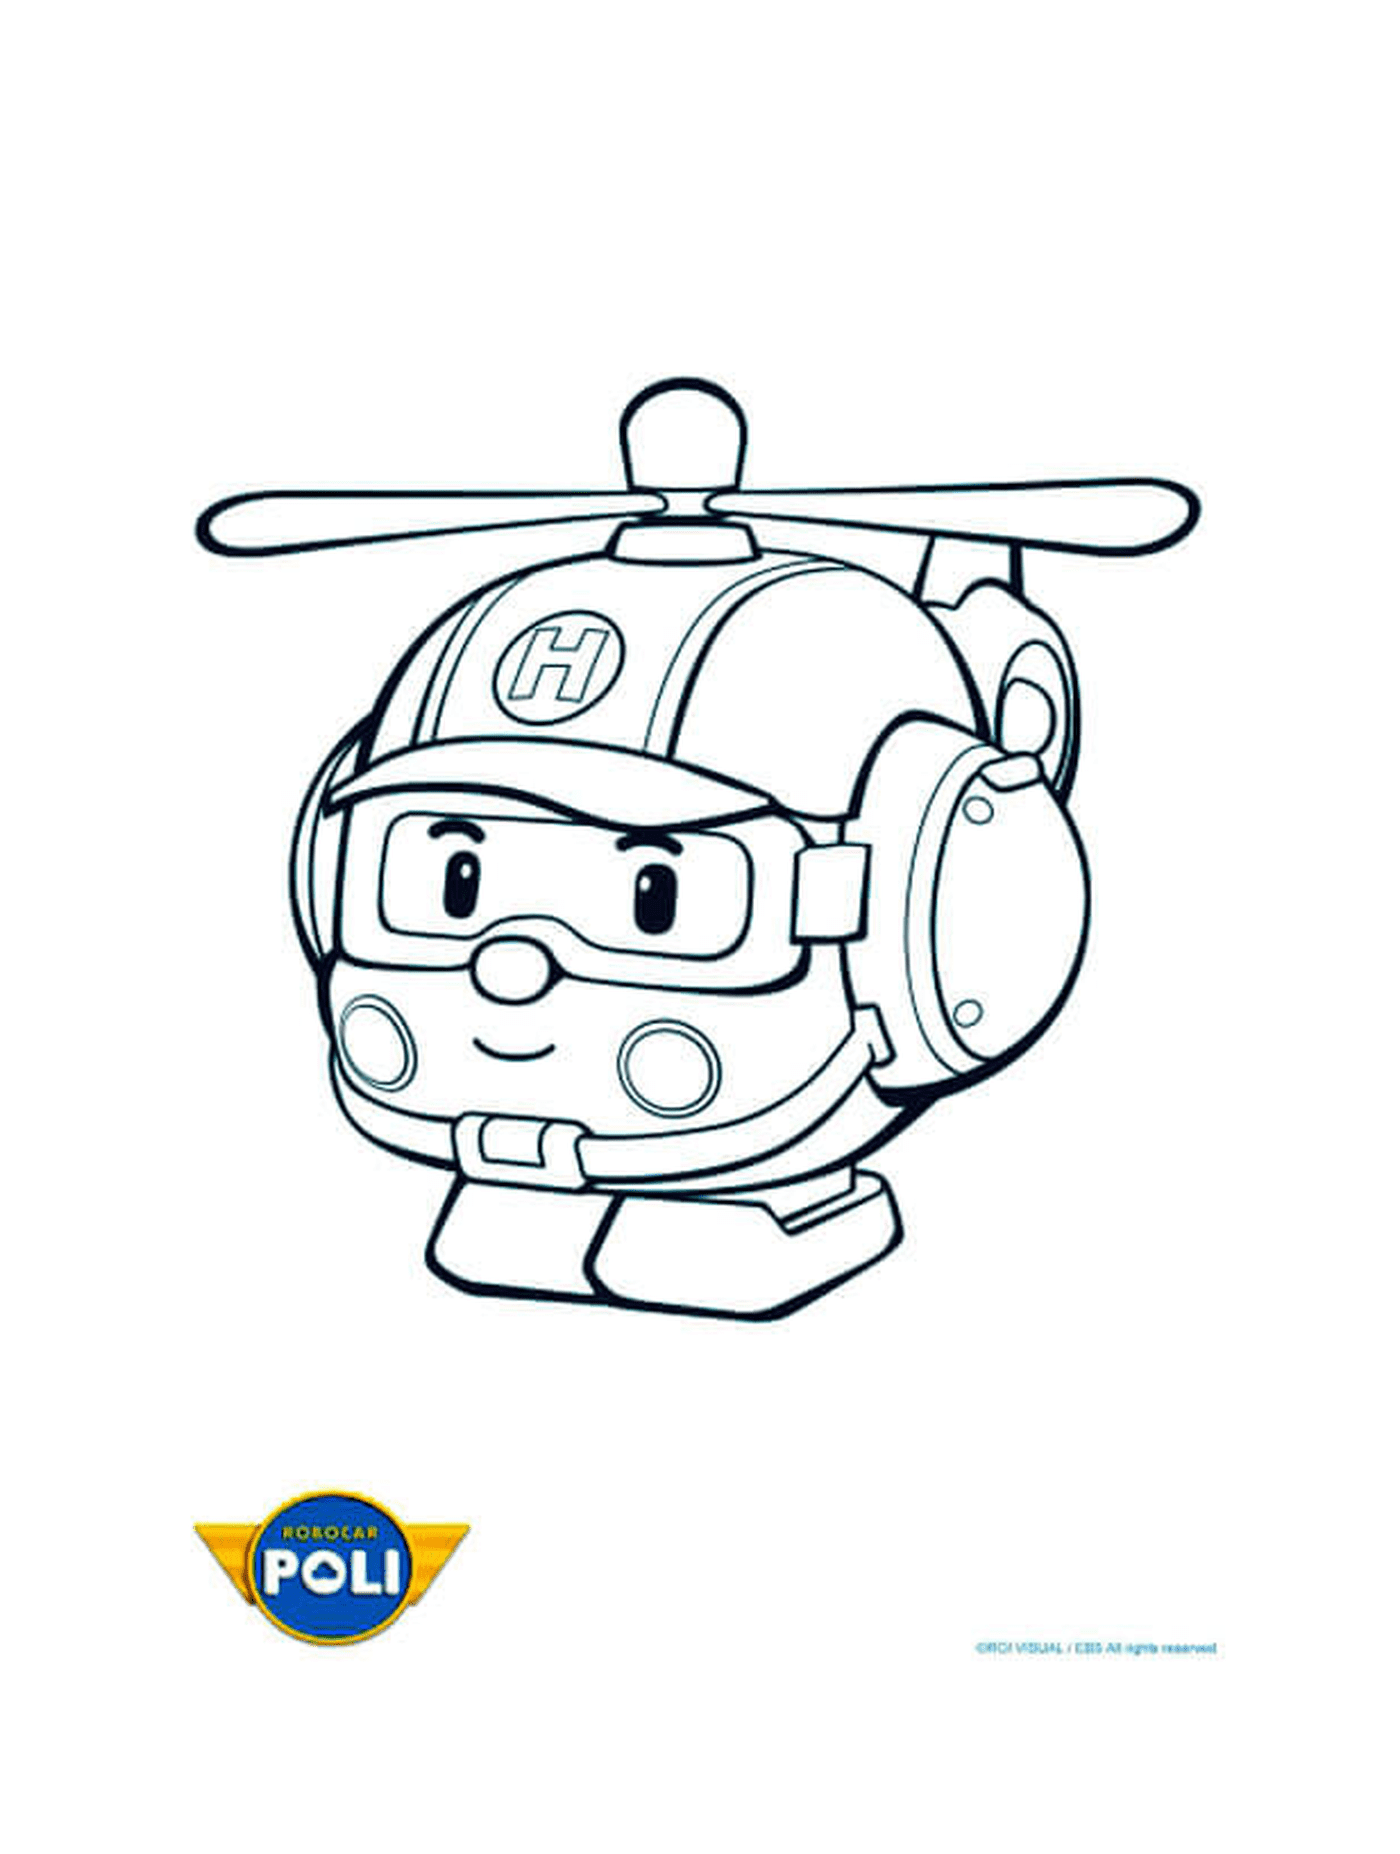 coloriage helicoptere robocar poli